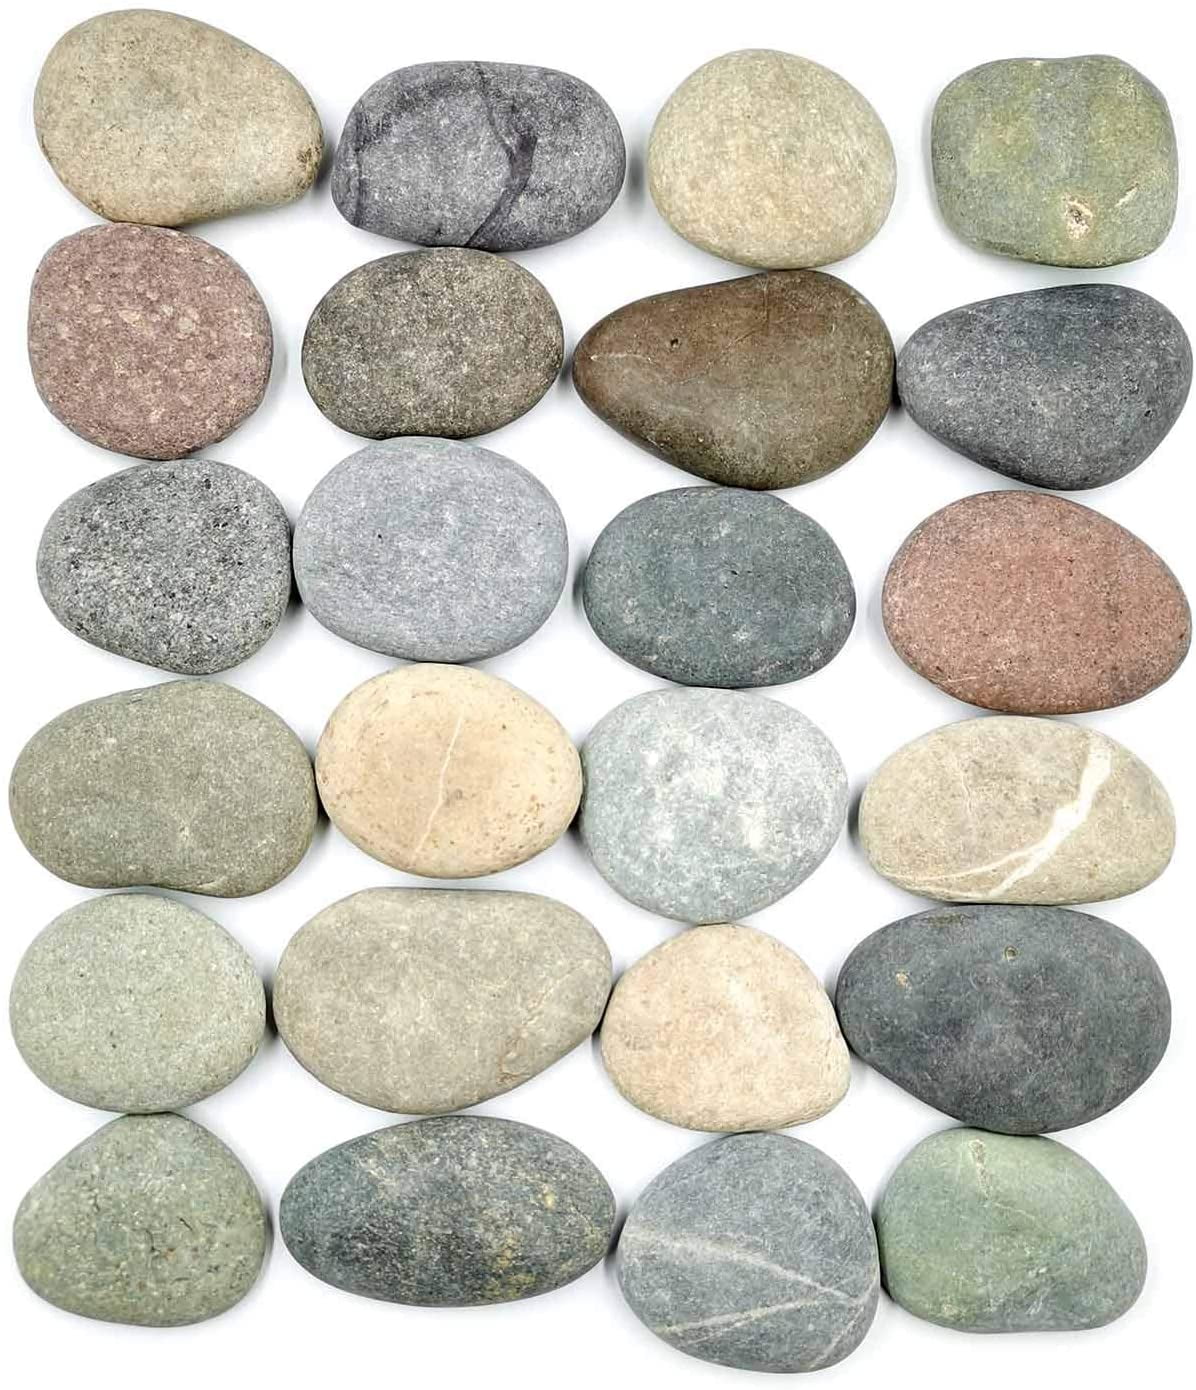 Ciieeo 60 Pcs Painted Stone Craft Rocks for Painting Flat River Rocks  Extra-Flat and Smooth River Rocks Flower Pot Pebbles Decorative Garden  Smooth